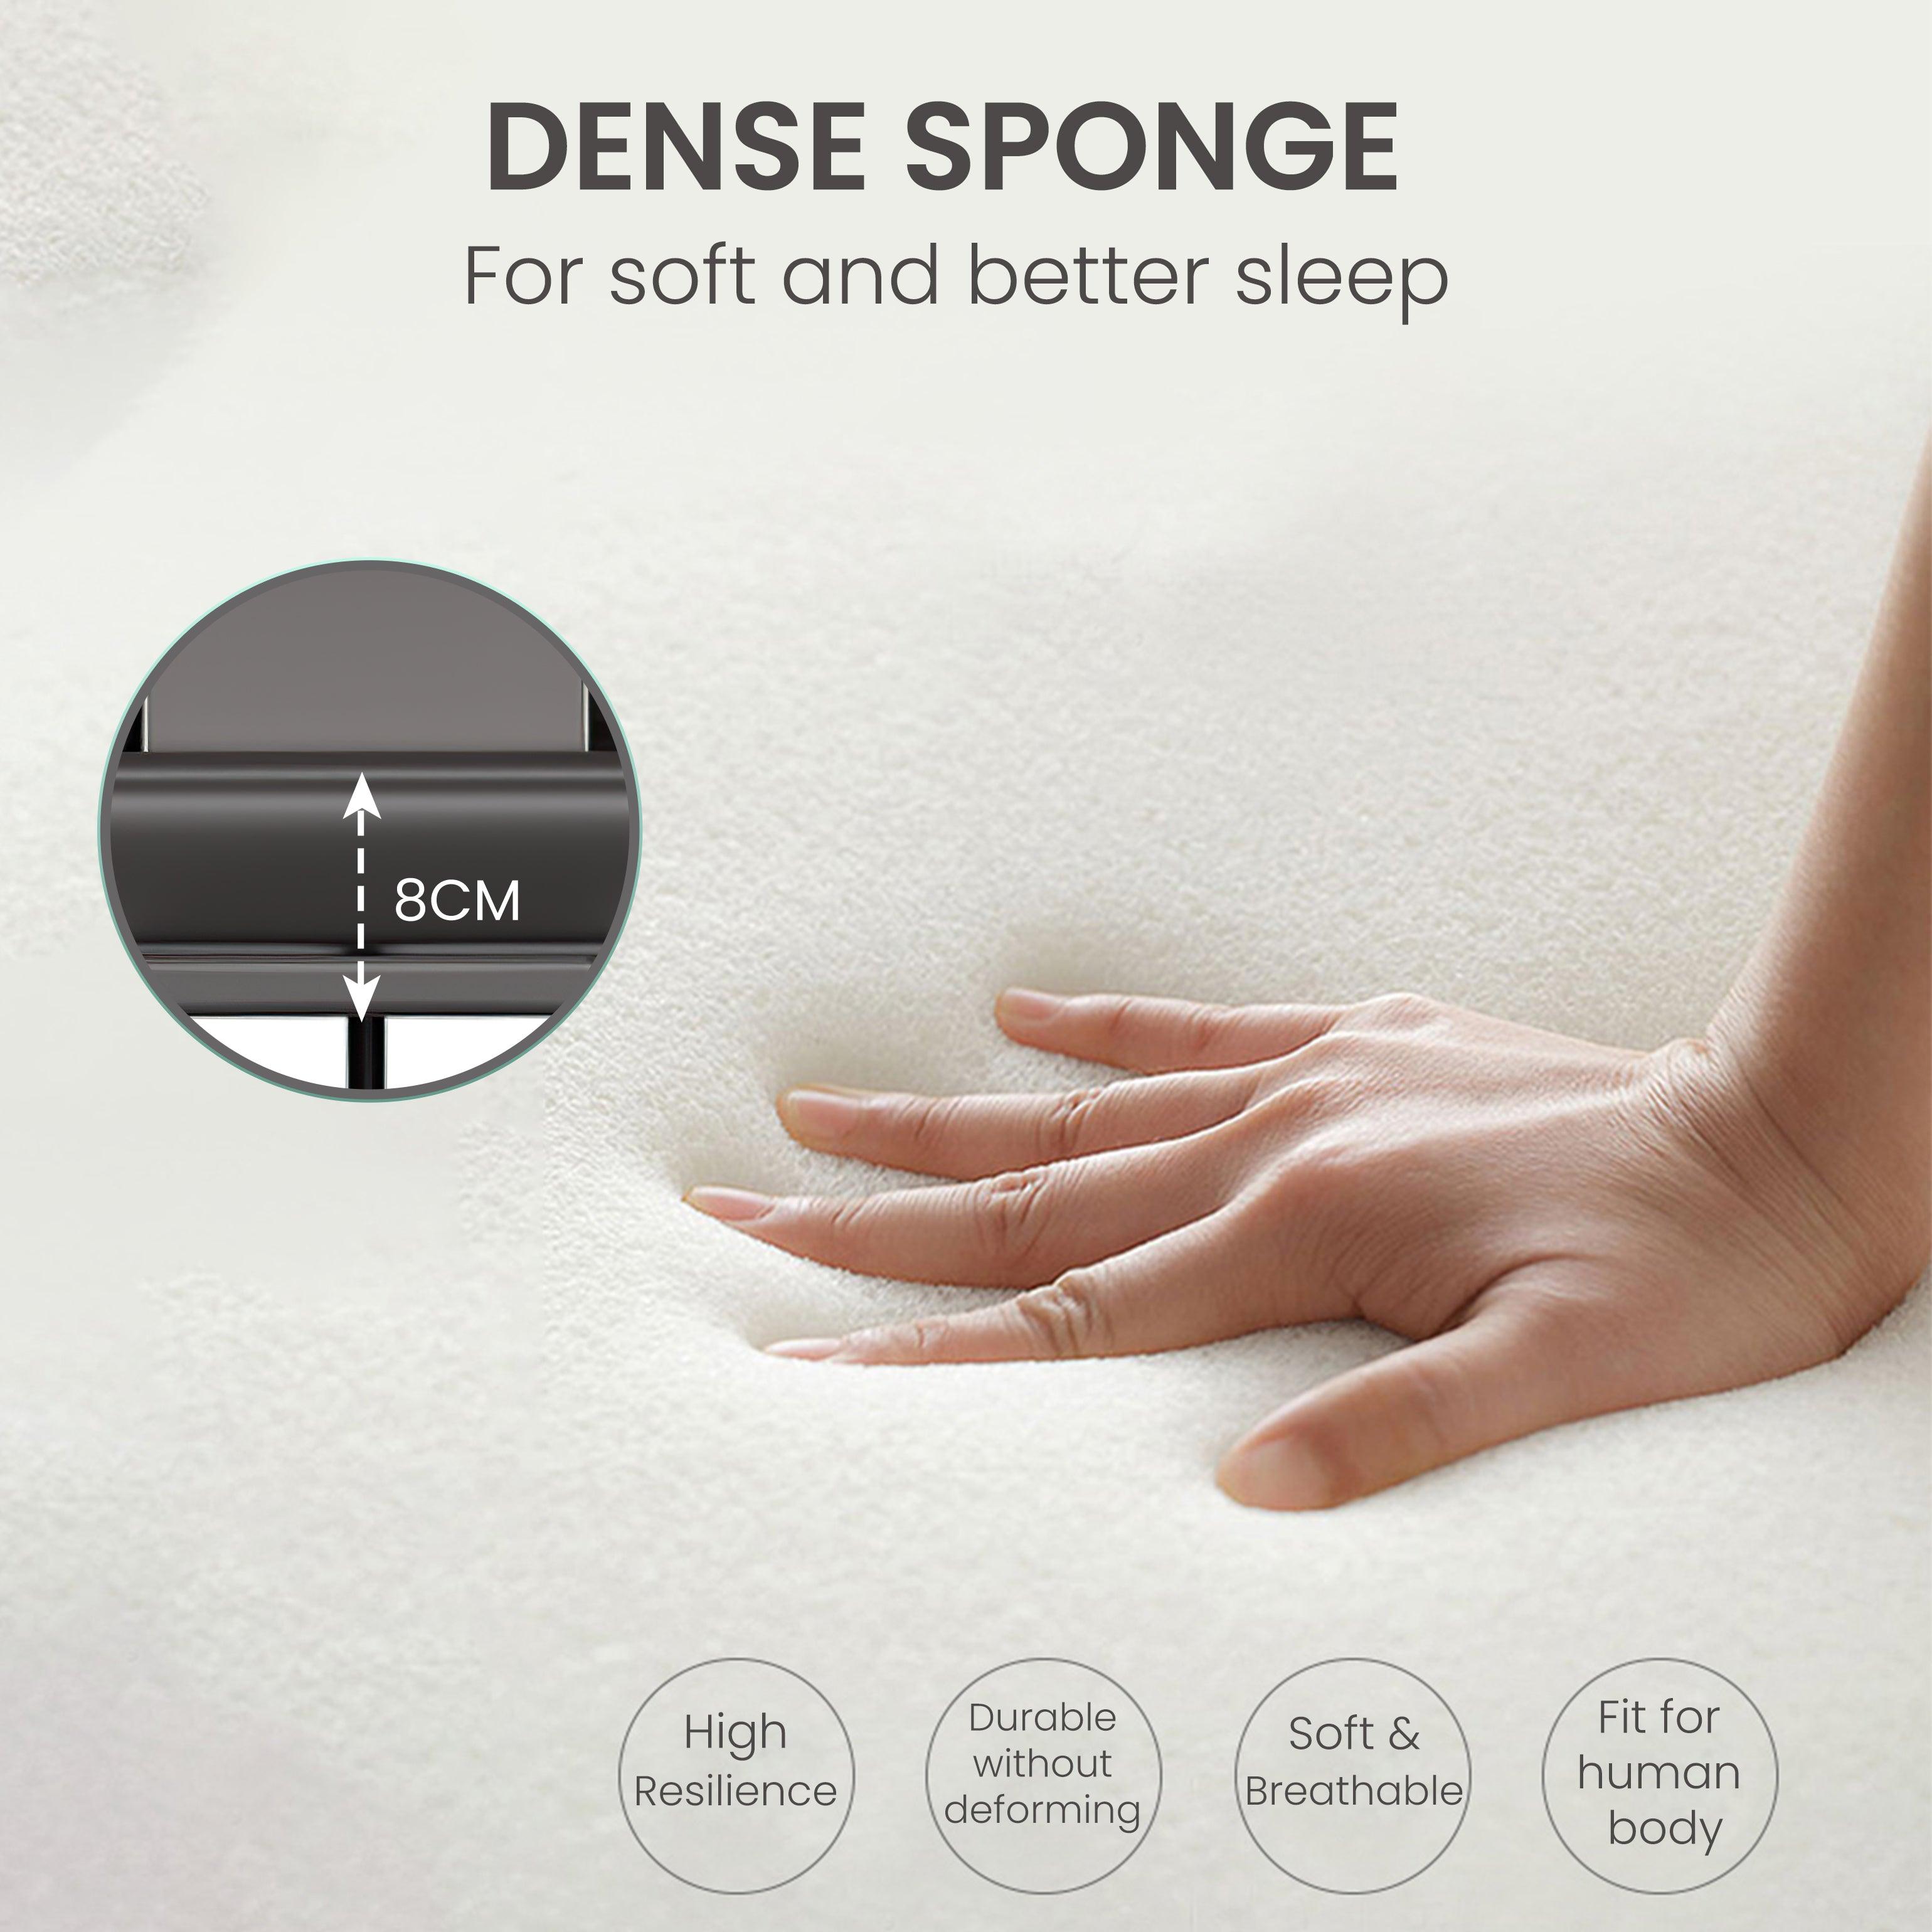 Hand pressing dense sponge mattress showcasing 8cm thickness for soft and better sleep with high resilience and durability